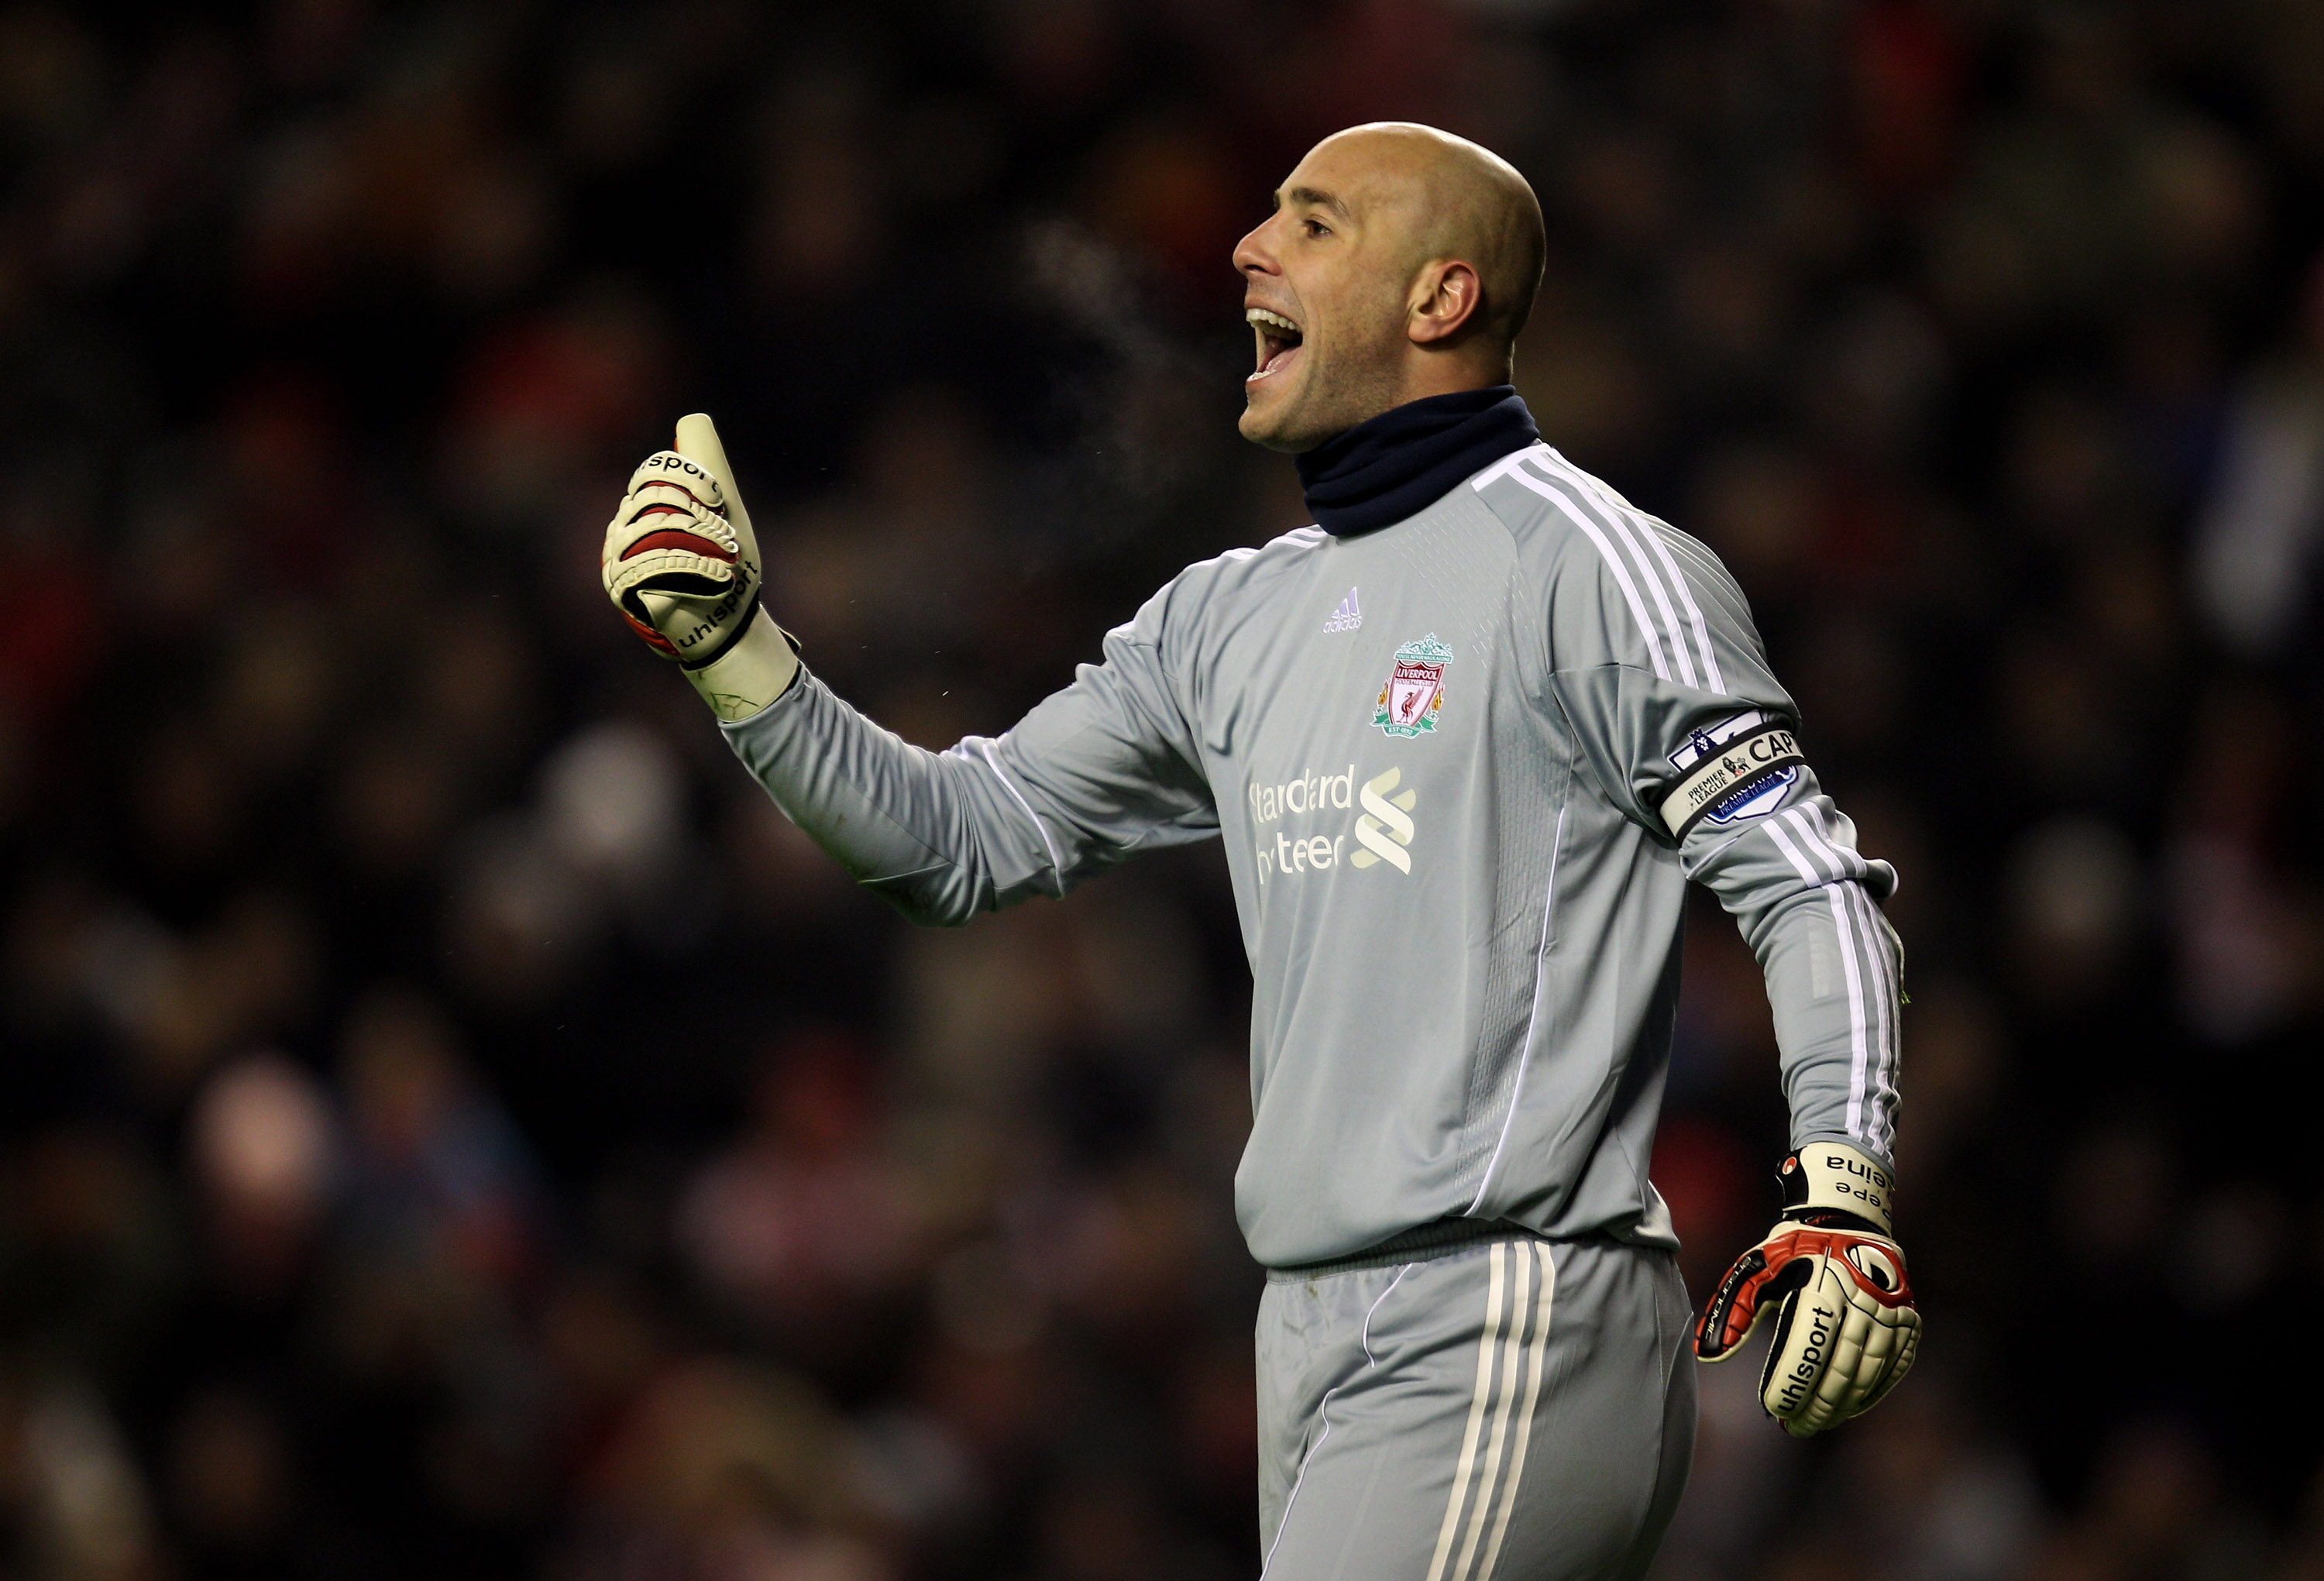 LIVERPOOL, ENGLAND - DECEMBER 06:   Pepe Reina of Liverpool shouts to his team mates during the Barclays Premier League match between Liverpool and Aston Villa at Anfield on December 6, 2010 in Liverpool, England. (Photo by Mark Thompson/Getty Images)